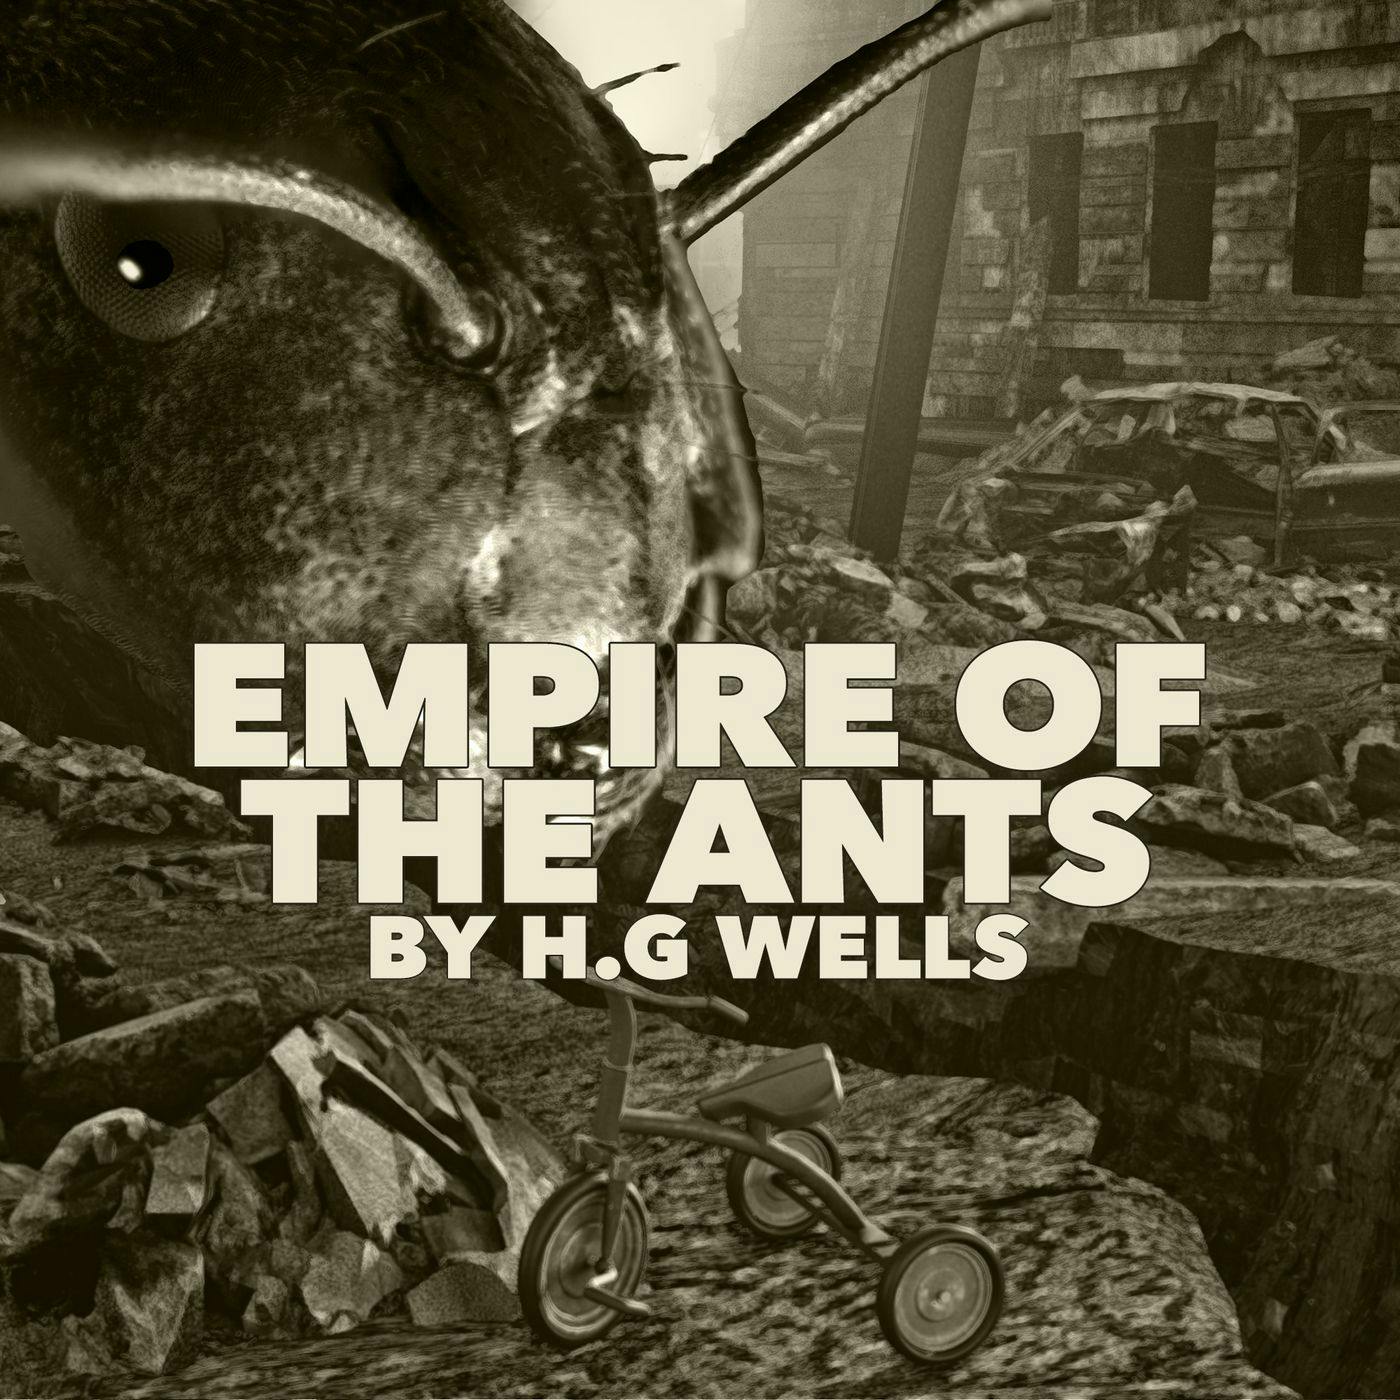 Empire of the Ants by H.G. Wells